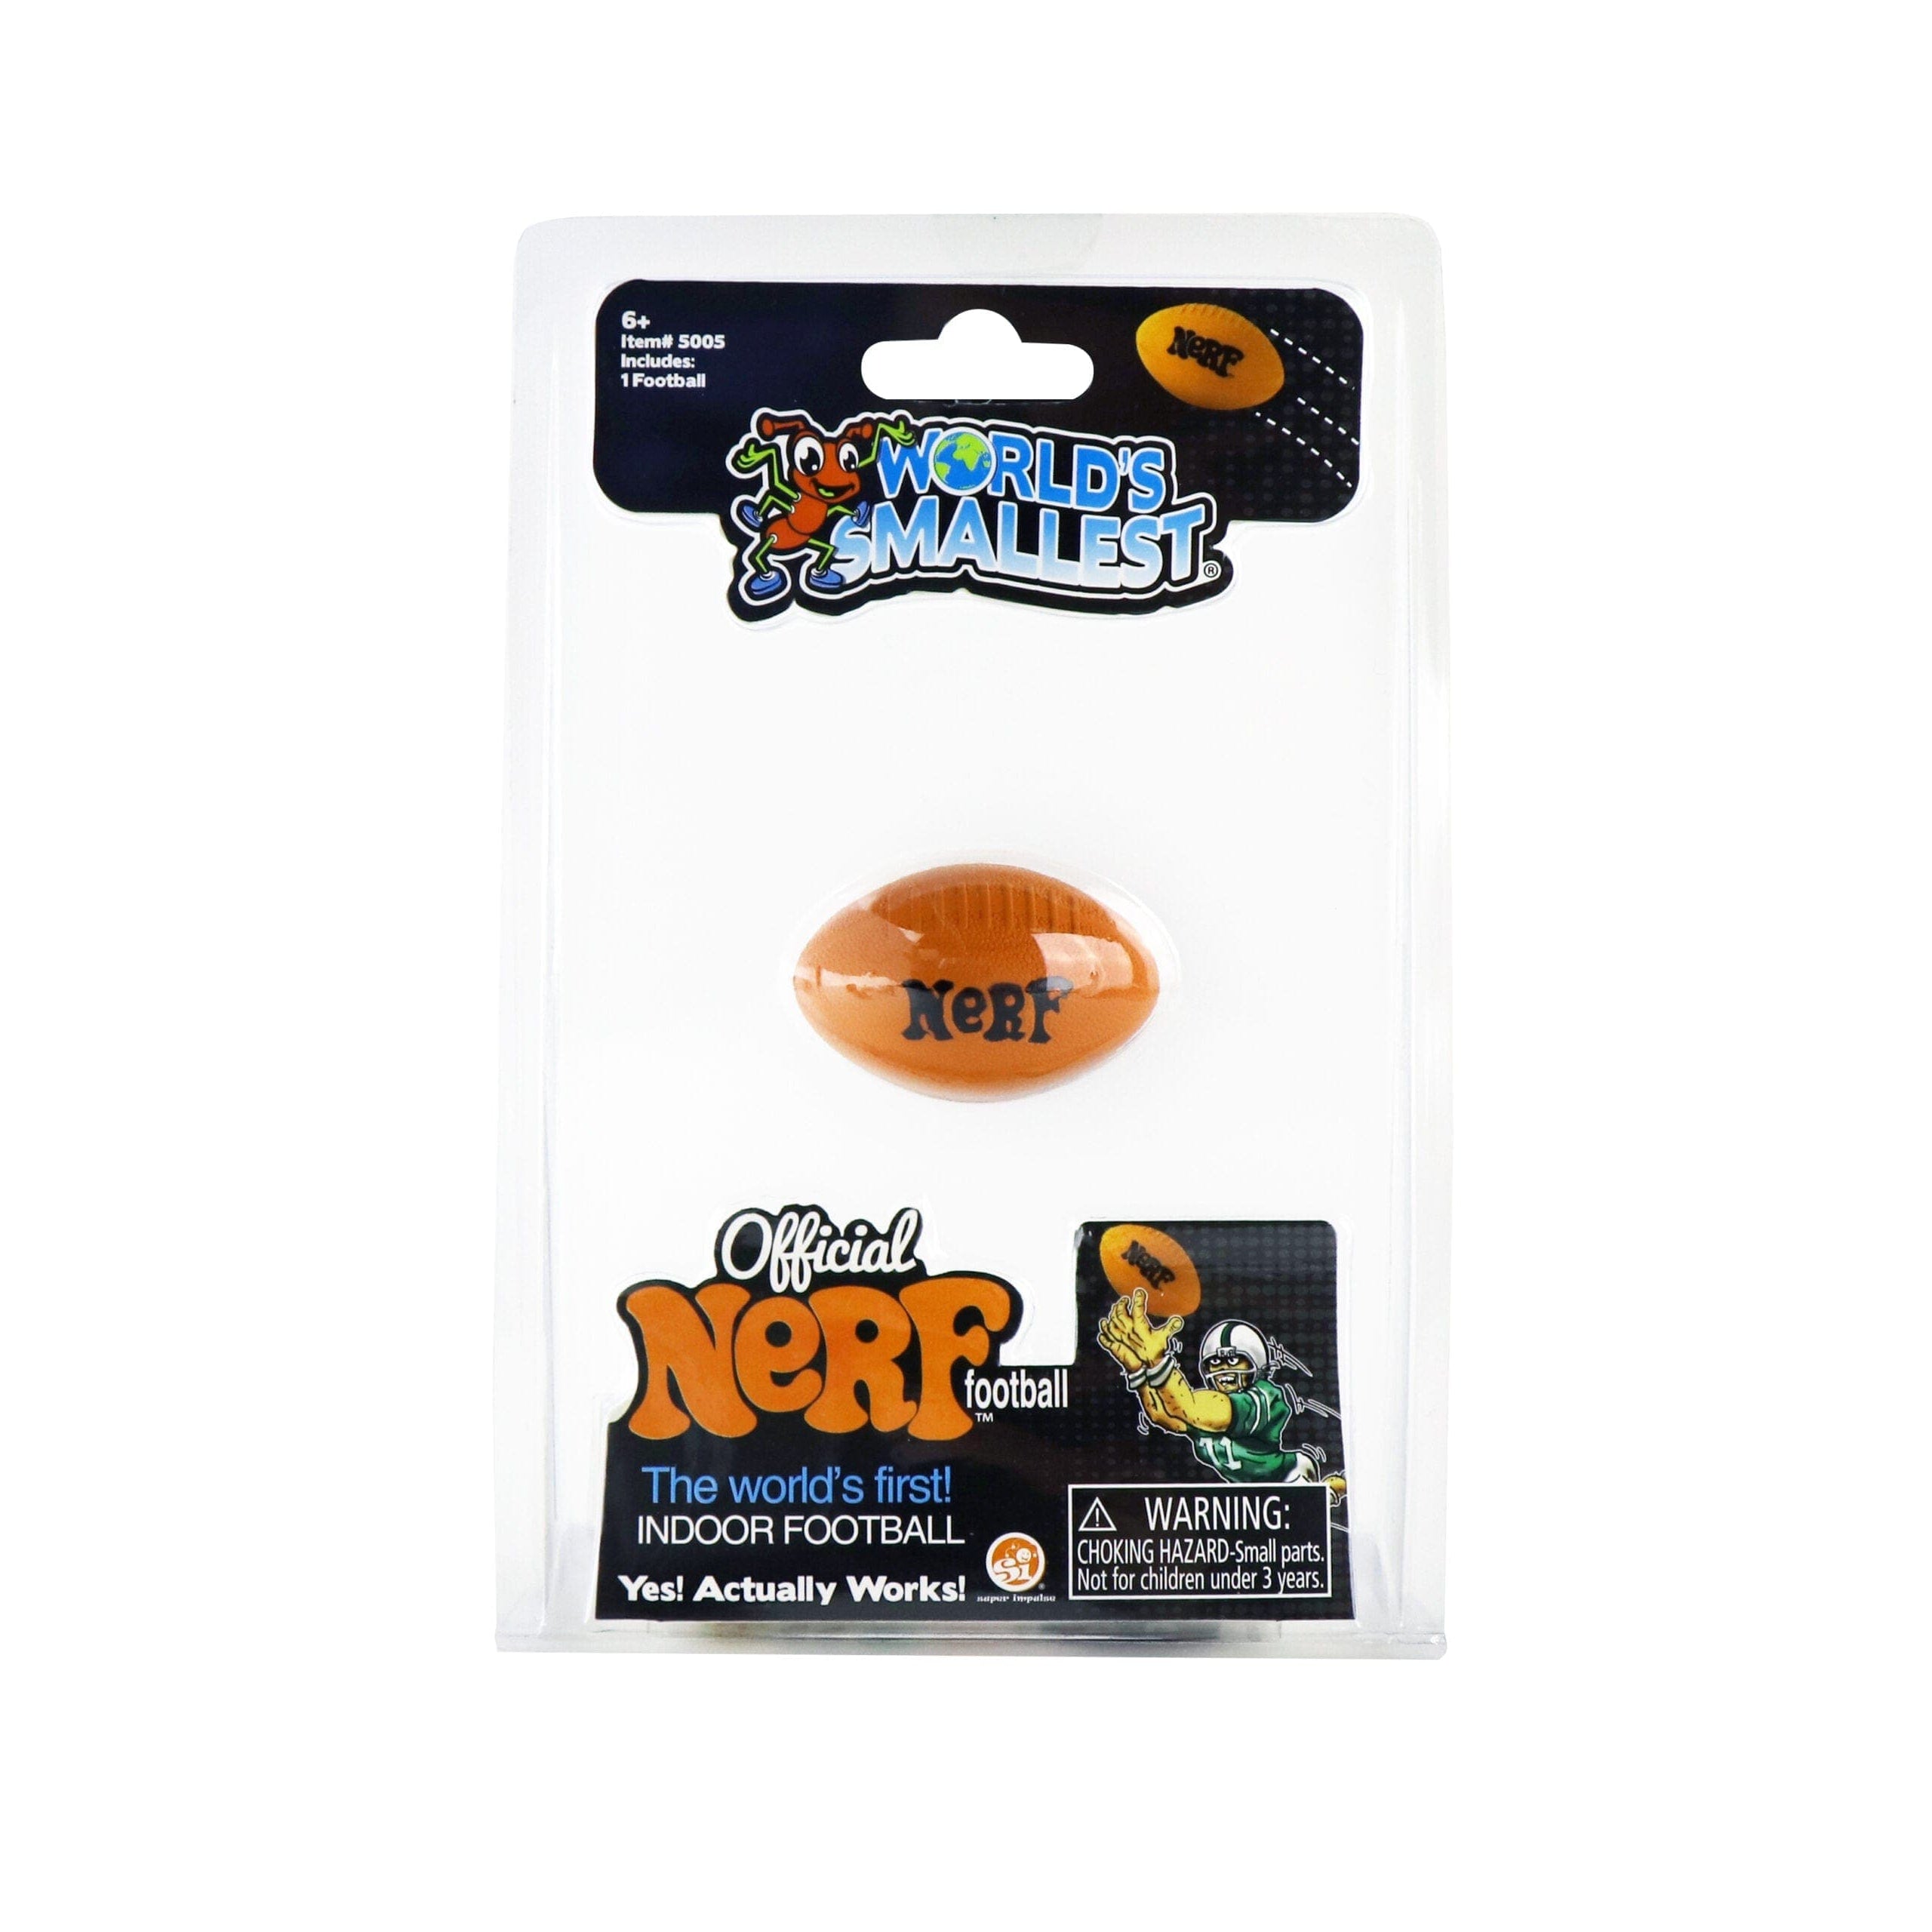 Super Impulse-World's Coolest Official Nerf Football-5005-Legacy Toys